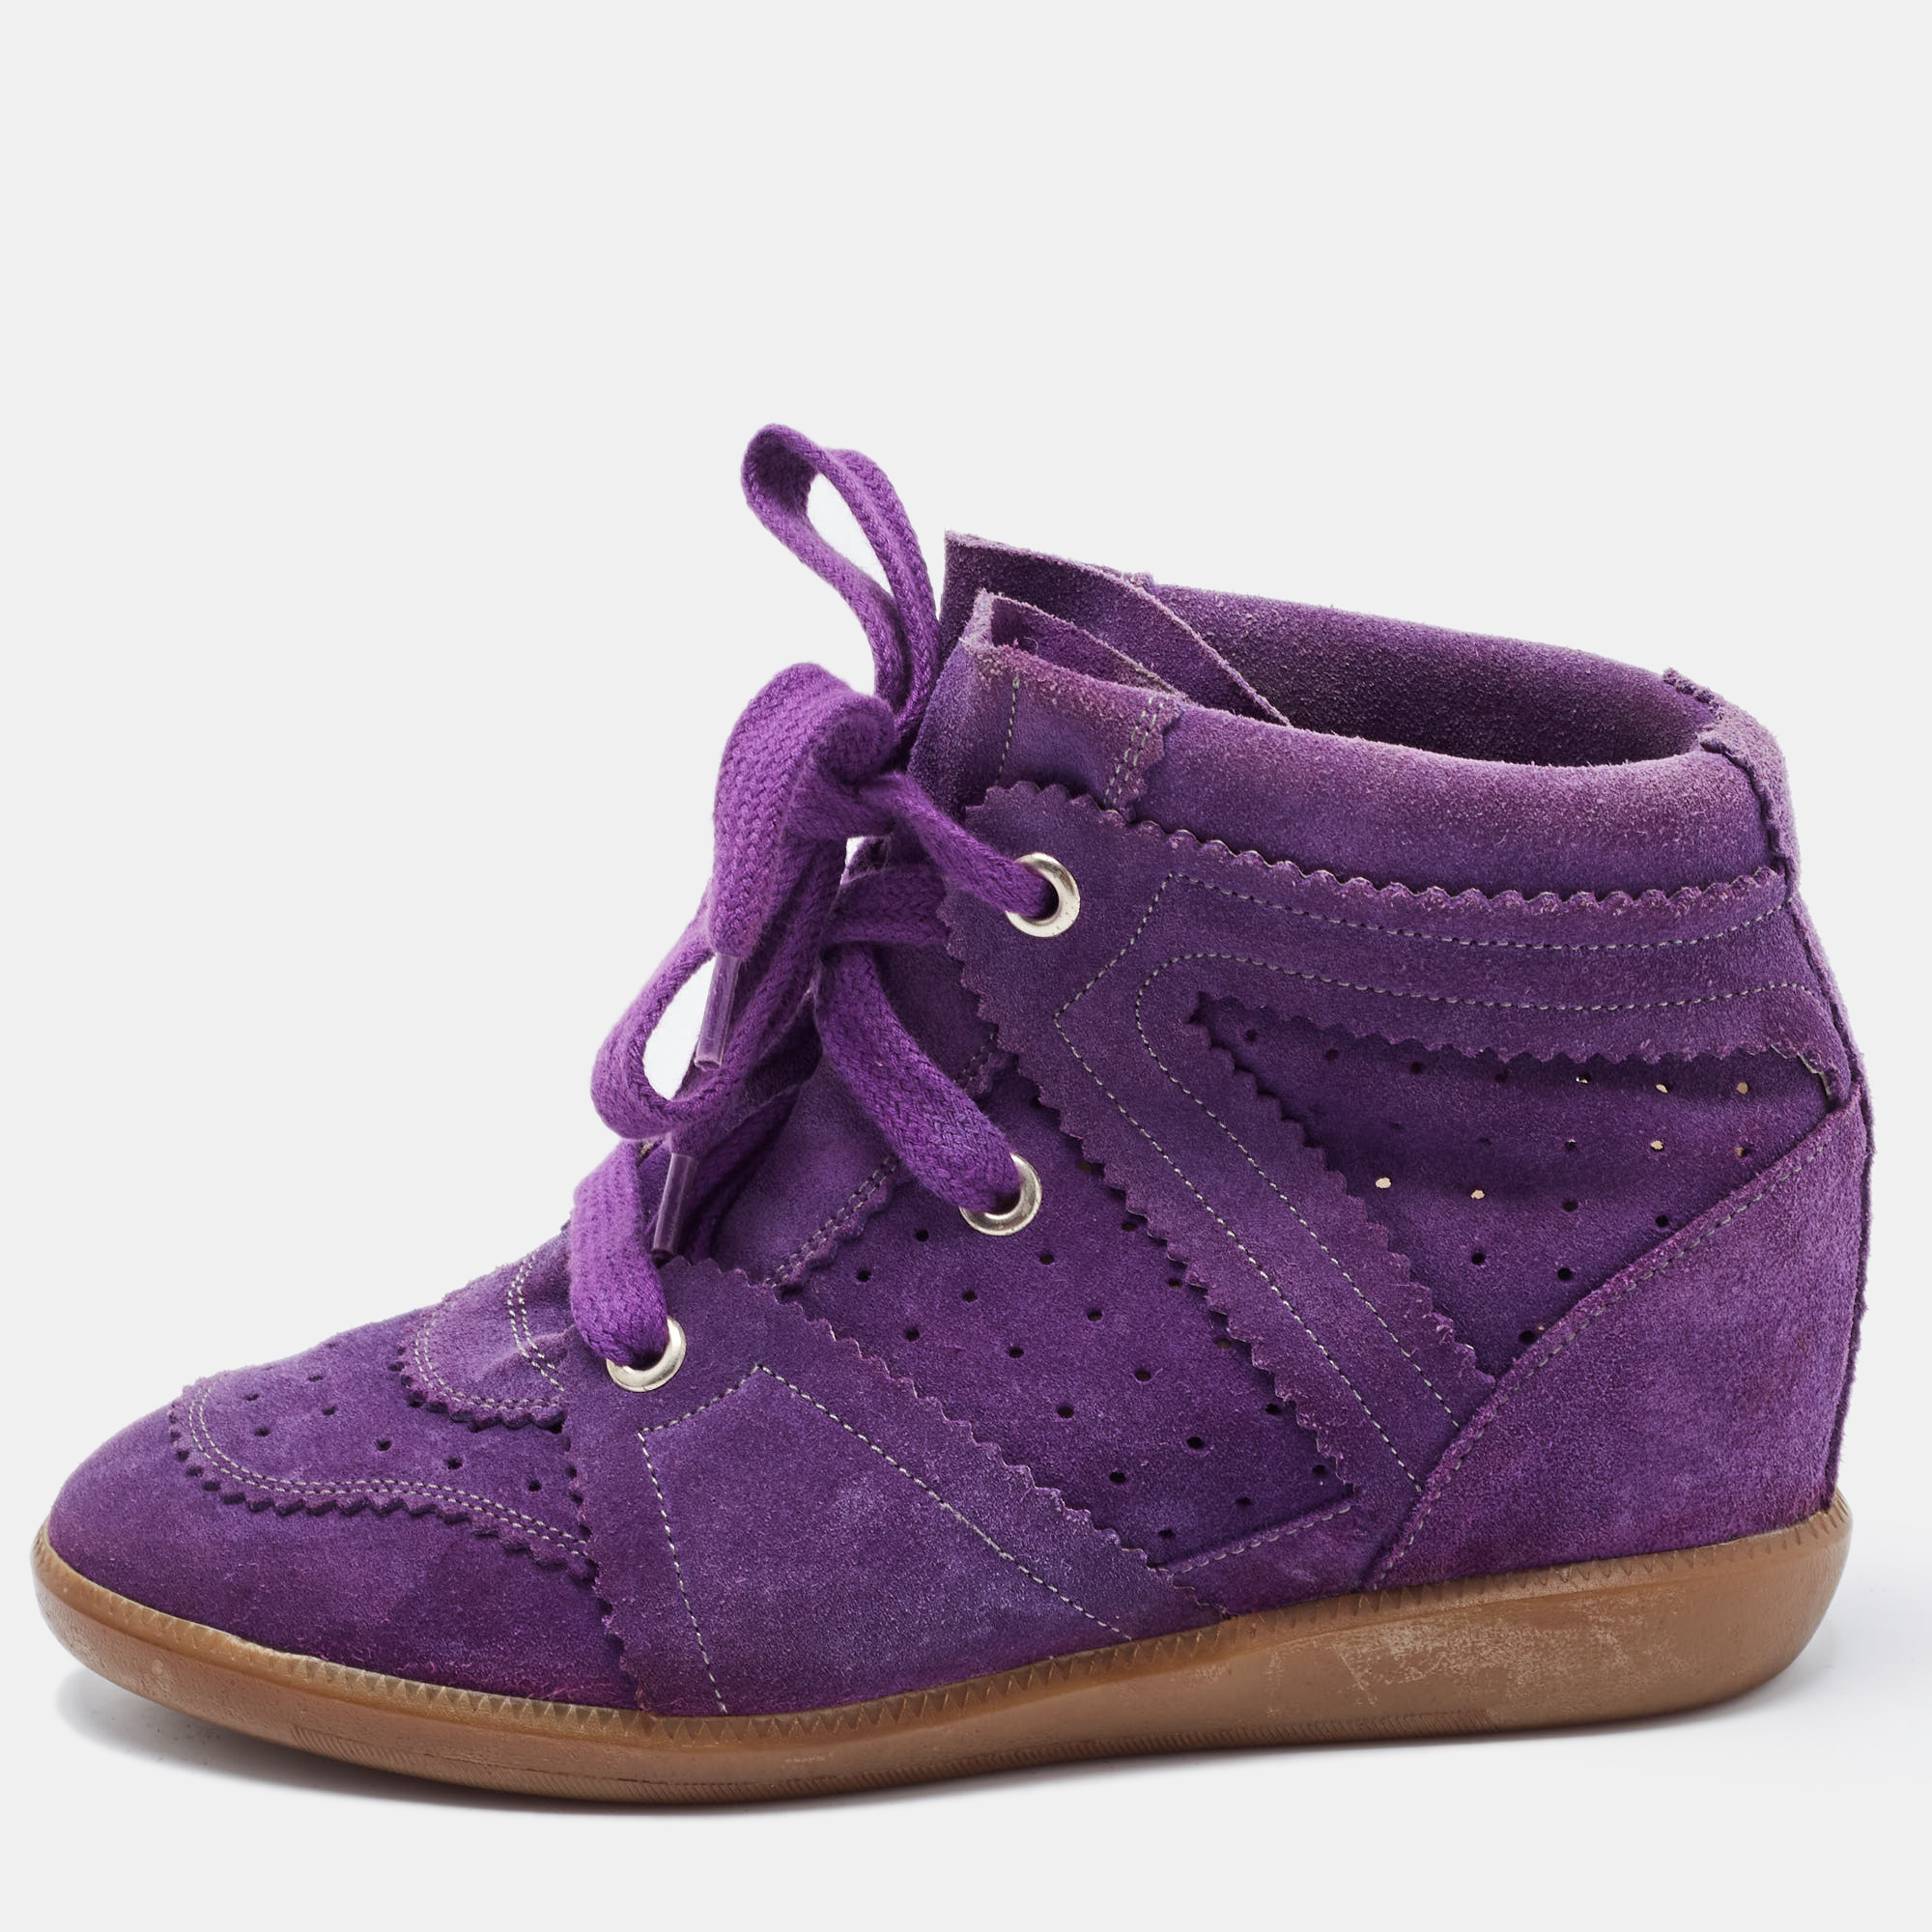 Isabel marant purple suede bobby sneakers size 40